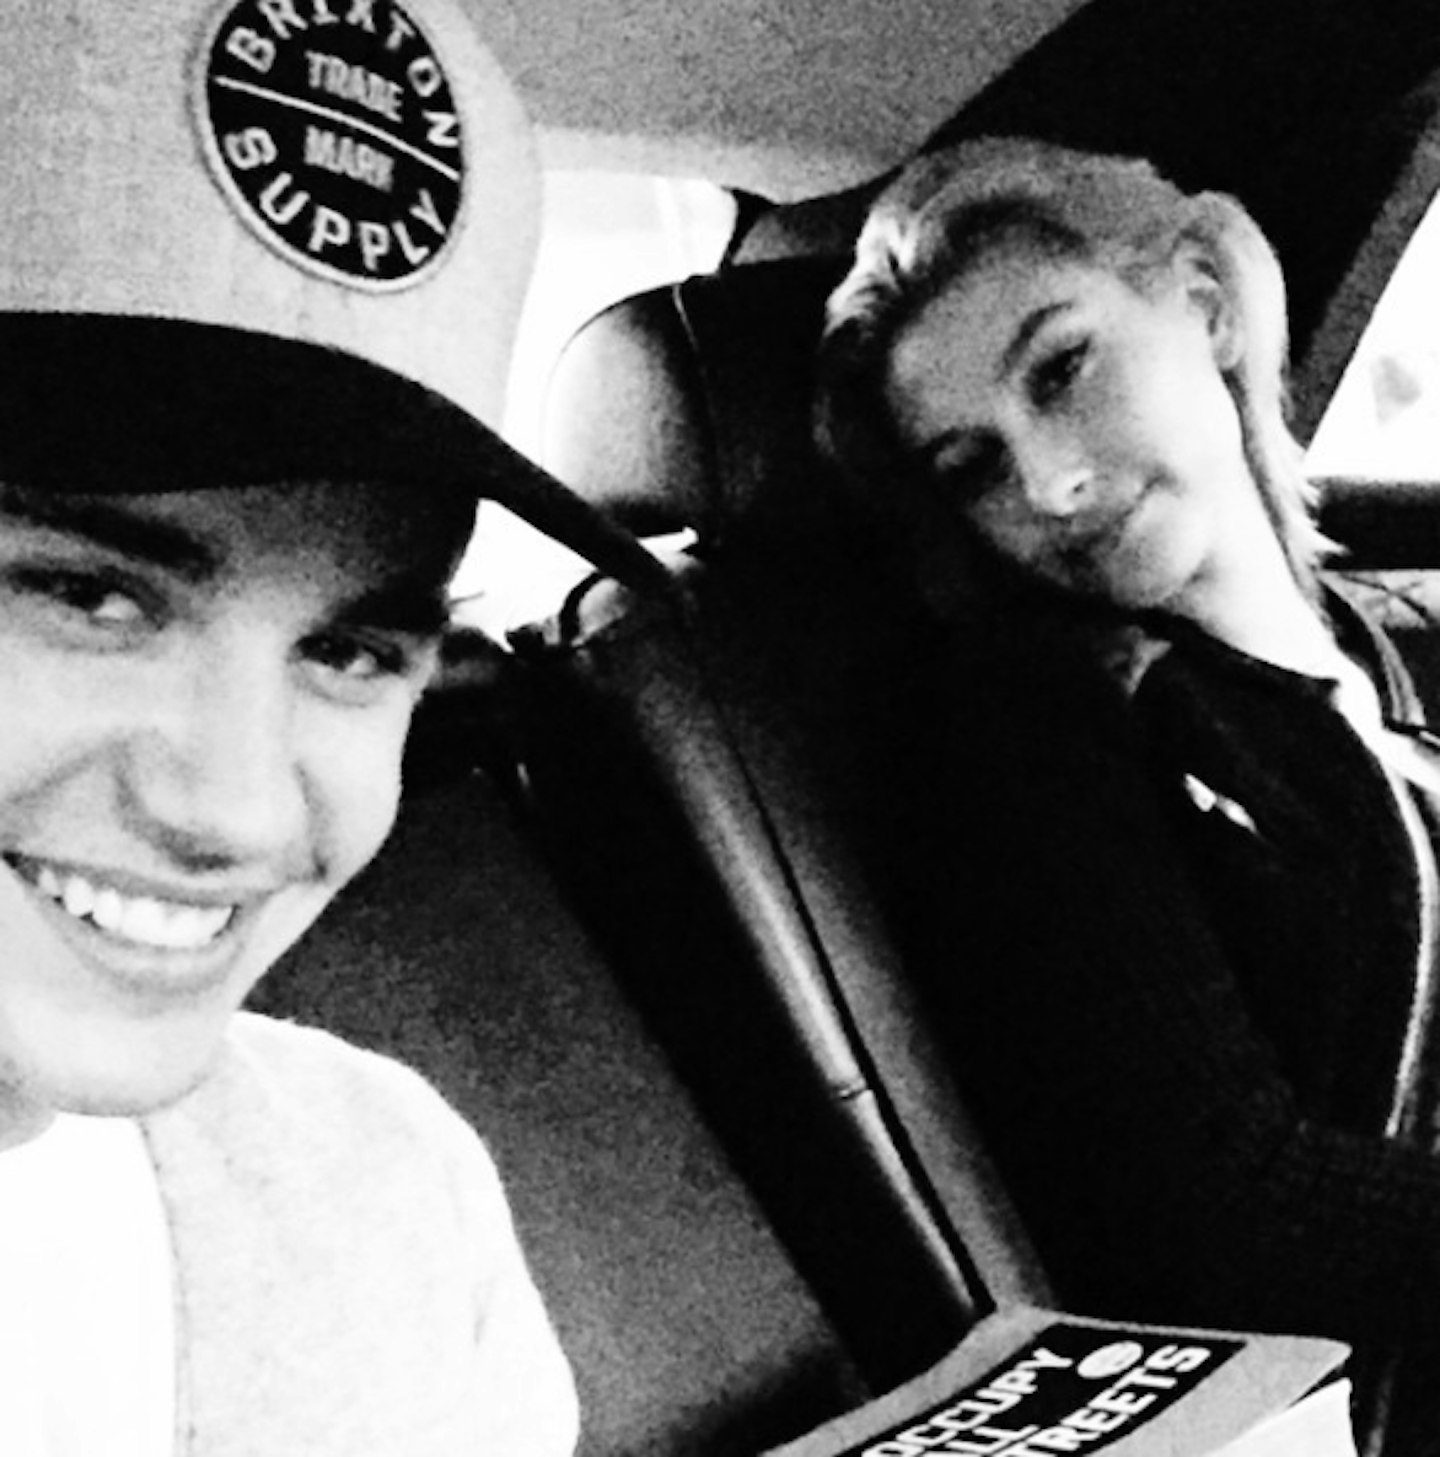 justin and hailey